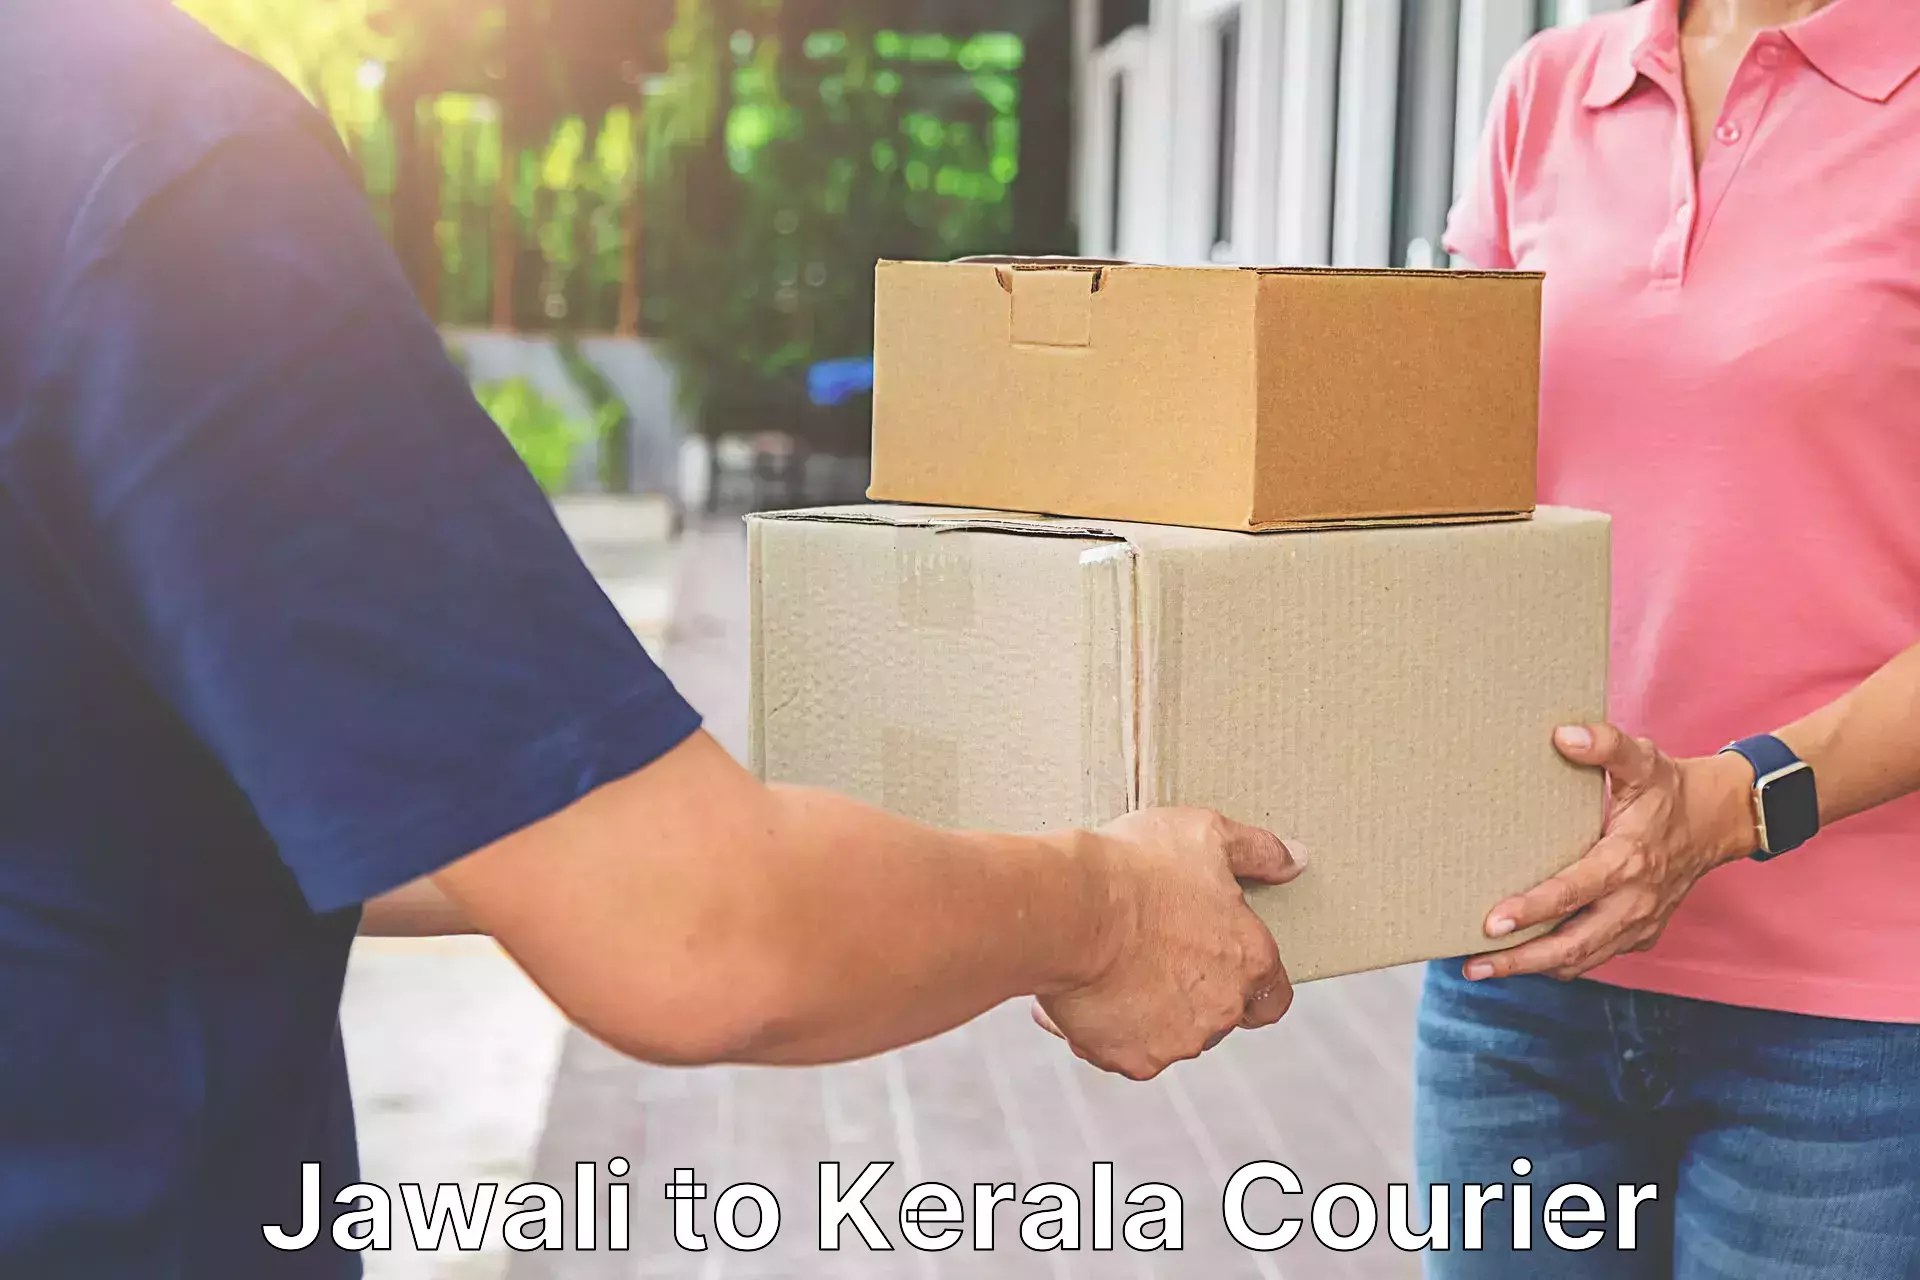 Subscription-based courier Jawali to Kerala